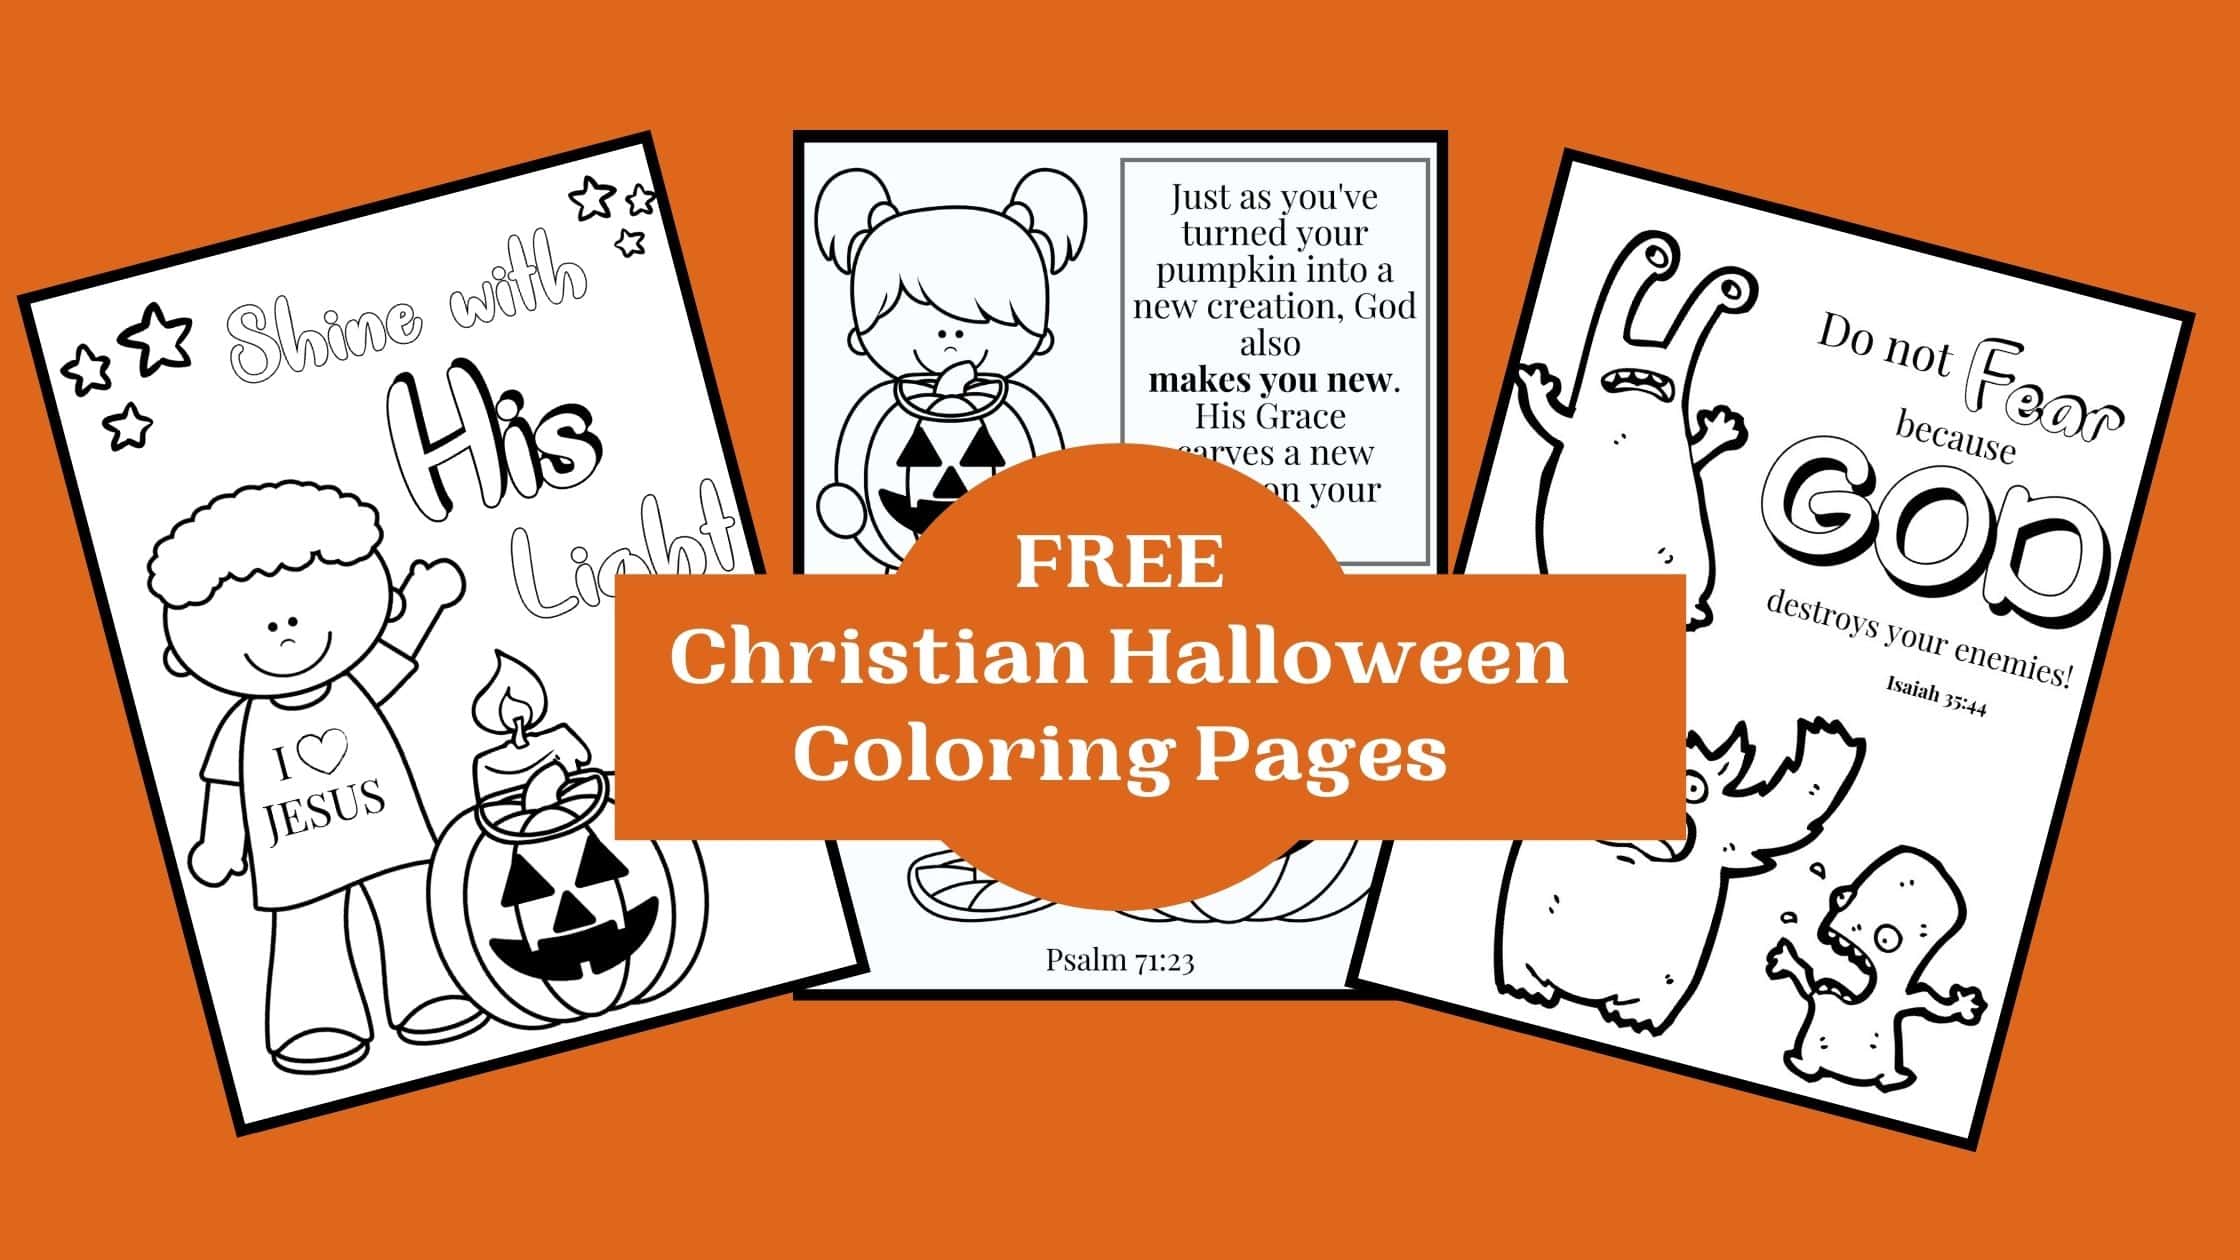 The Best Christian Halloween Coloring Pages - Bible Study Printables